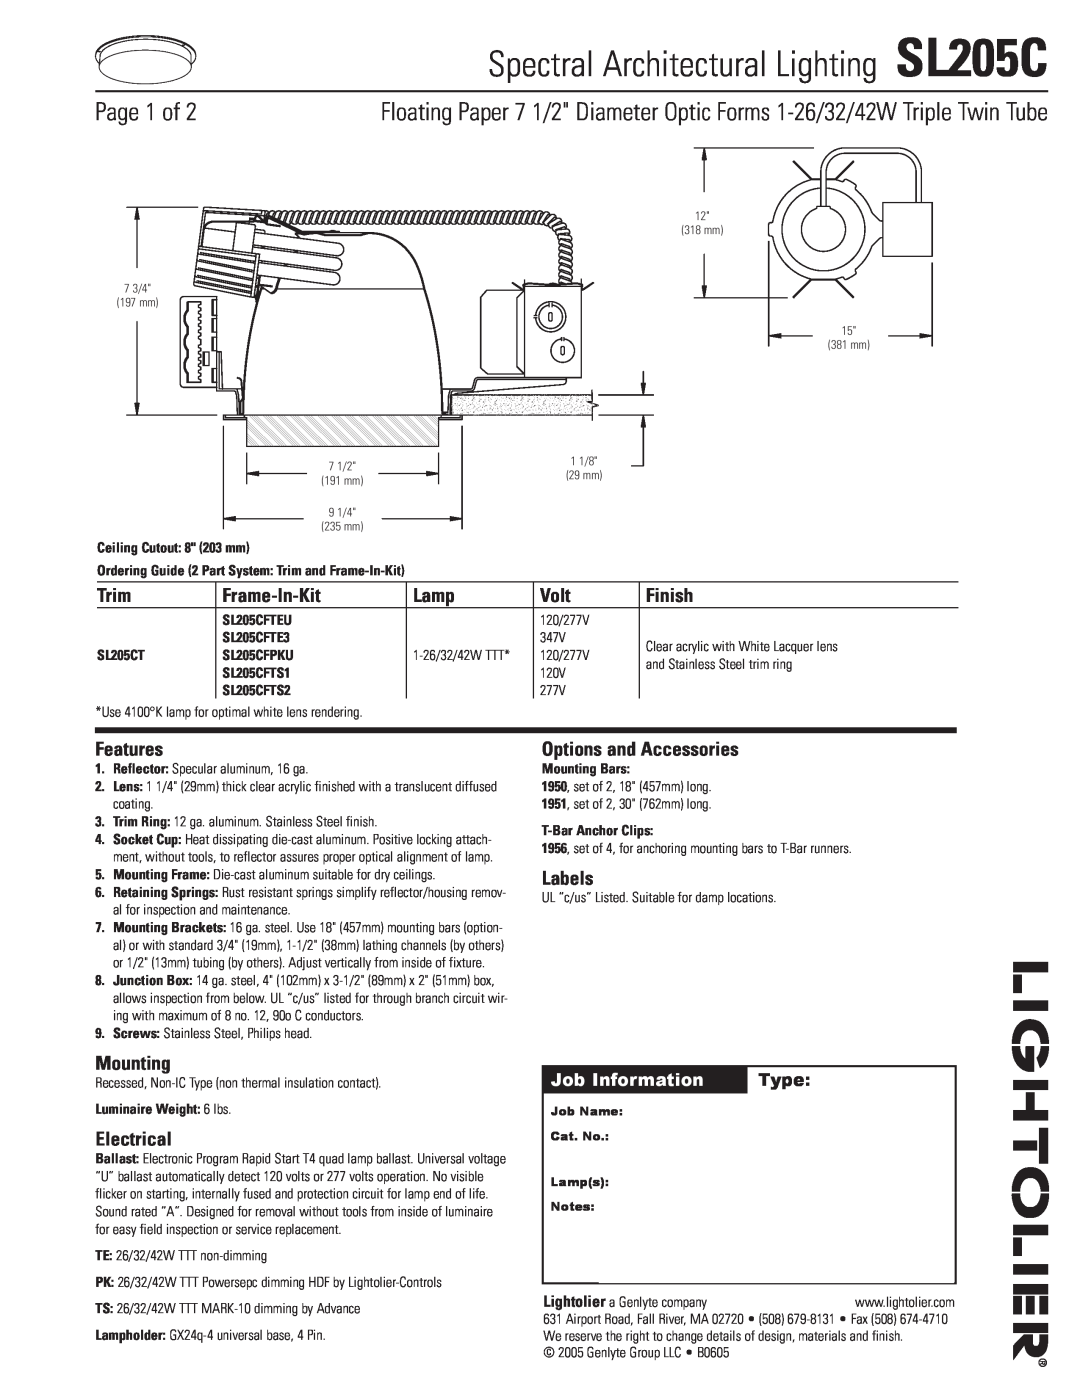 Lightolier manual Spectral Architectural Lighting SL205C, Page 1 of, Trim, Frame-In-Kit, Lamp, Volt, Finish, Features 